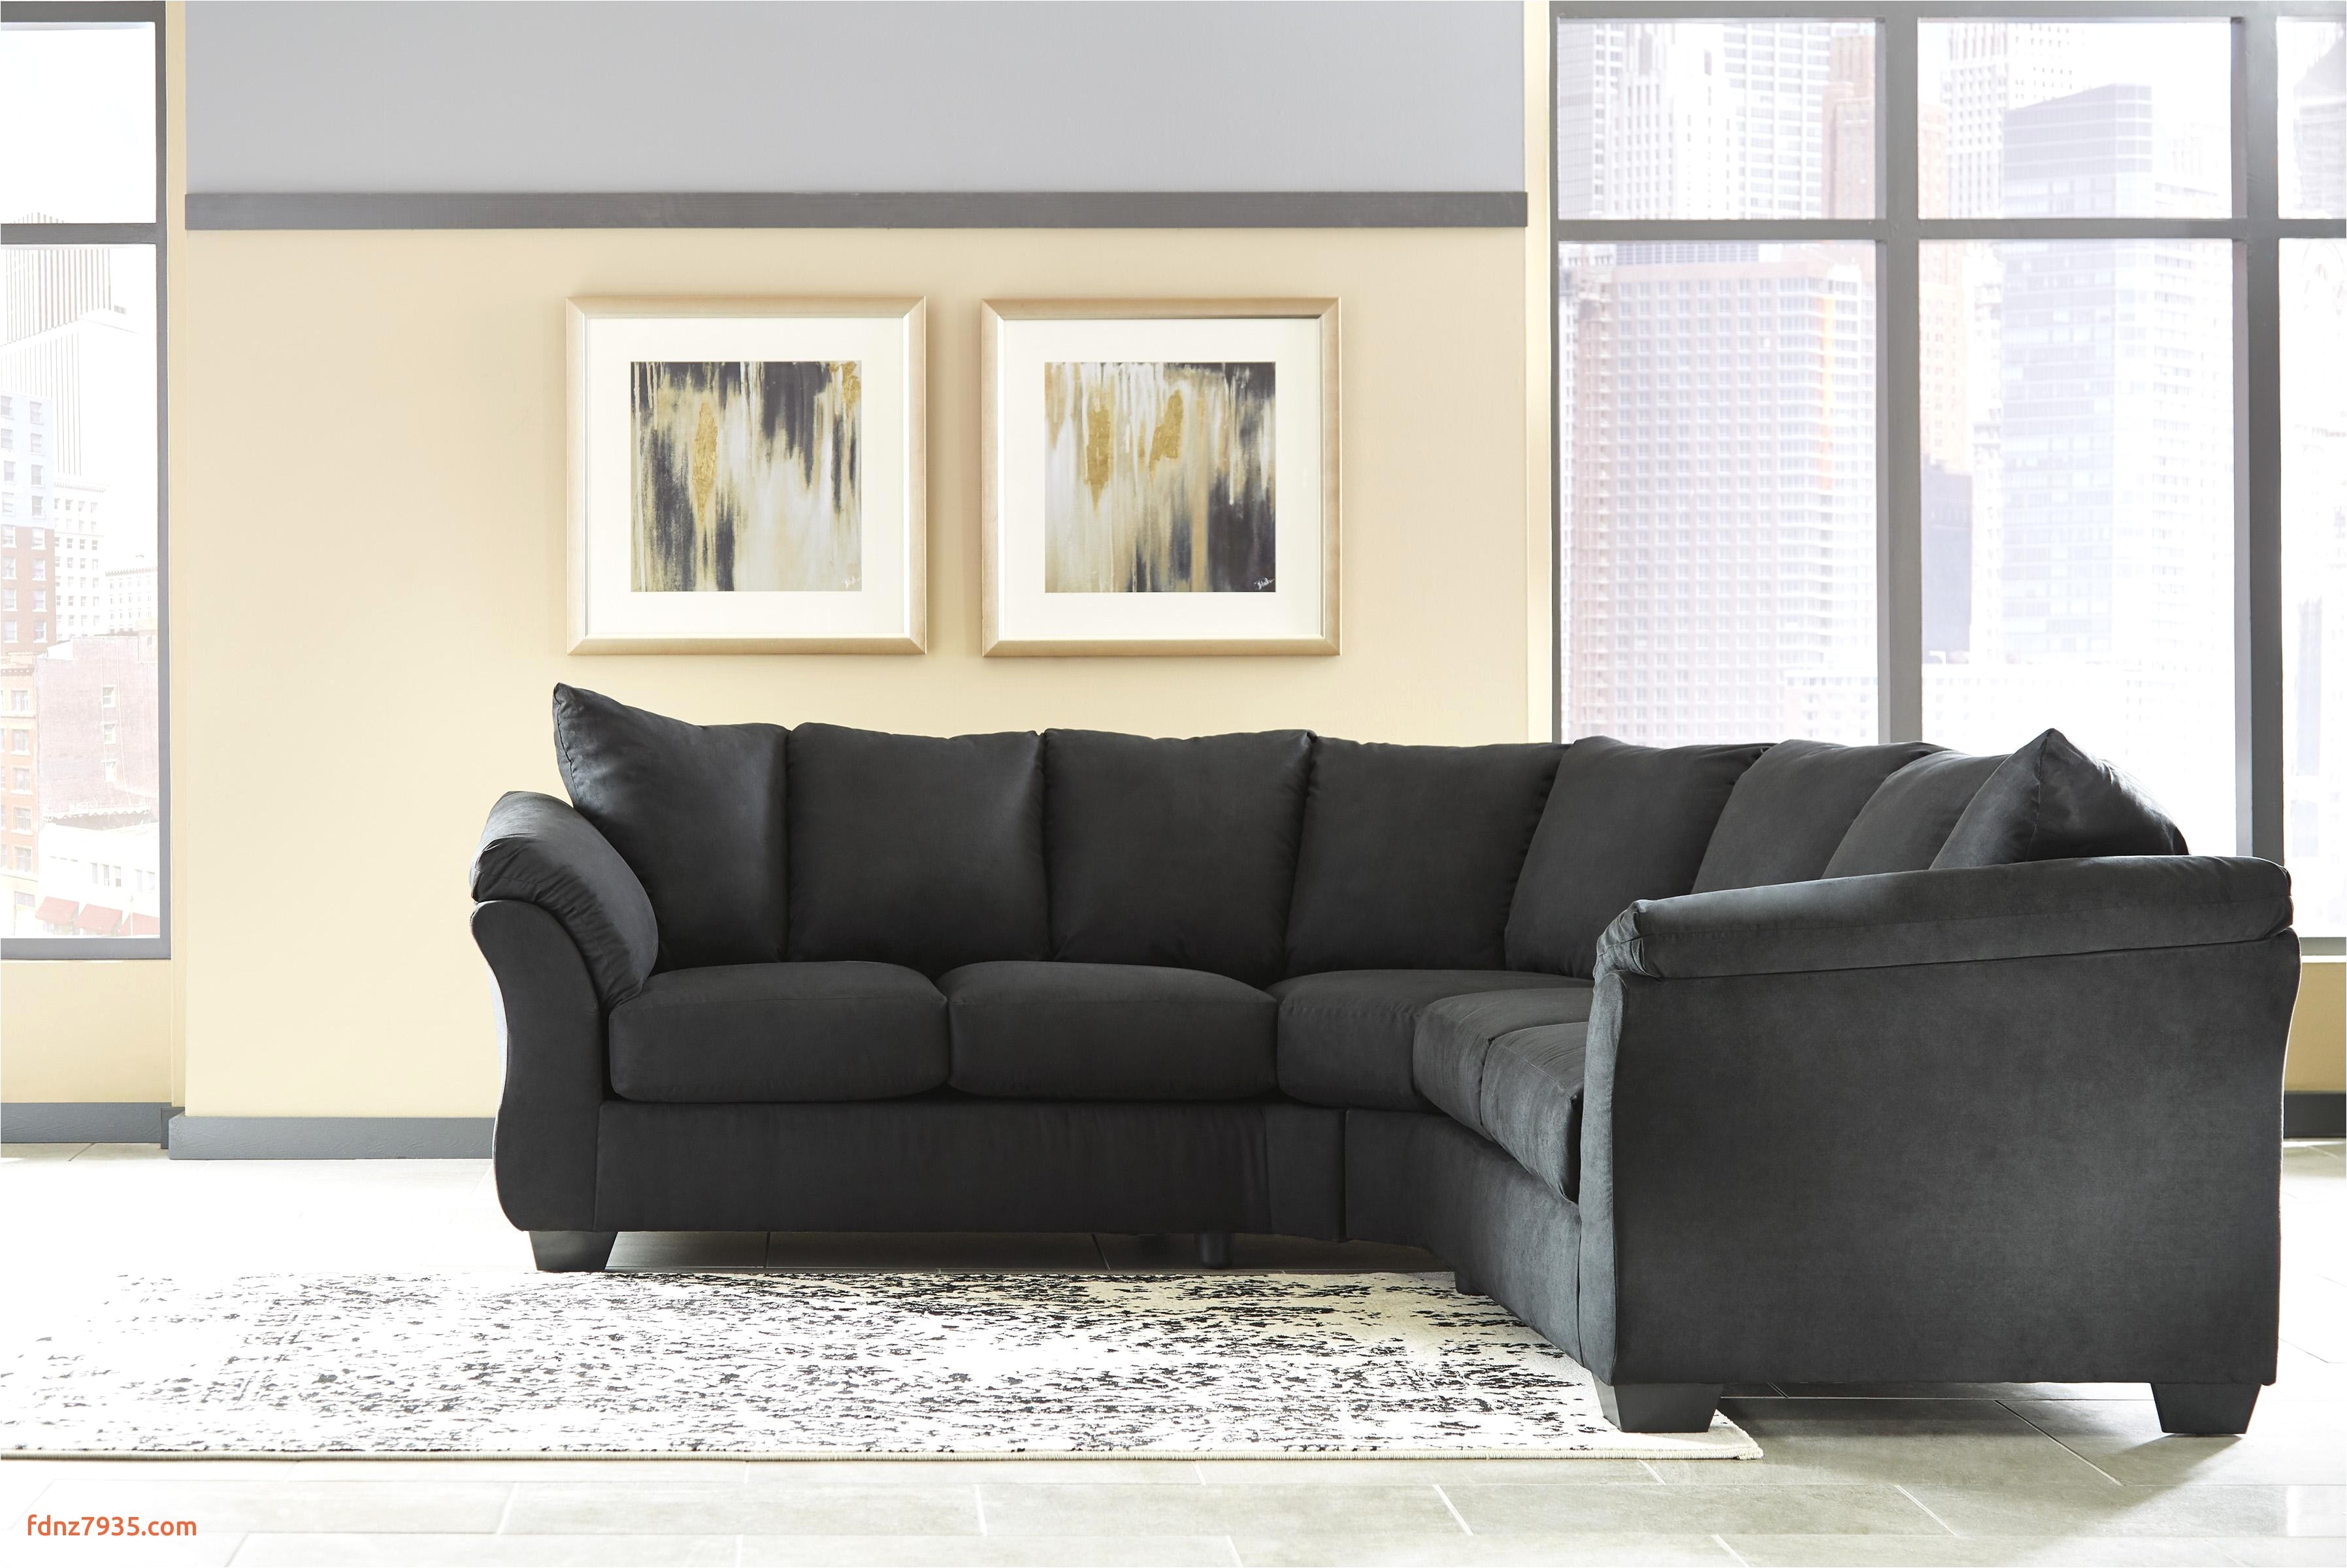 Best Rated Leather Sectional sofas White Leather Sectional sofa with Chaise Fresh sofa Design